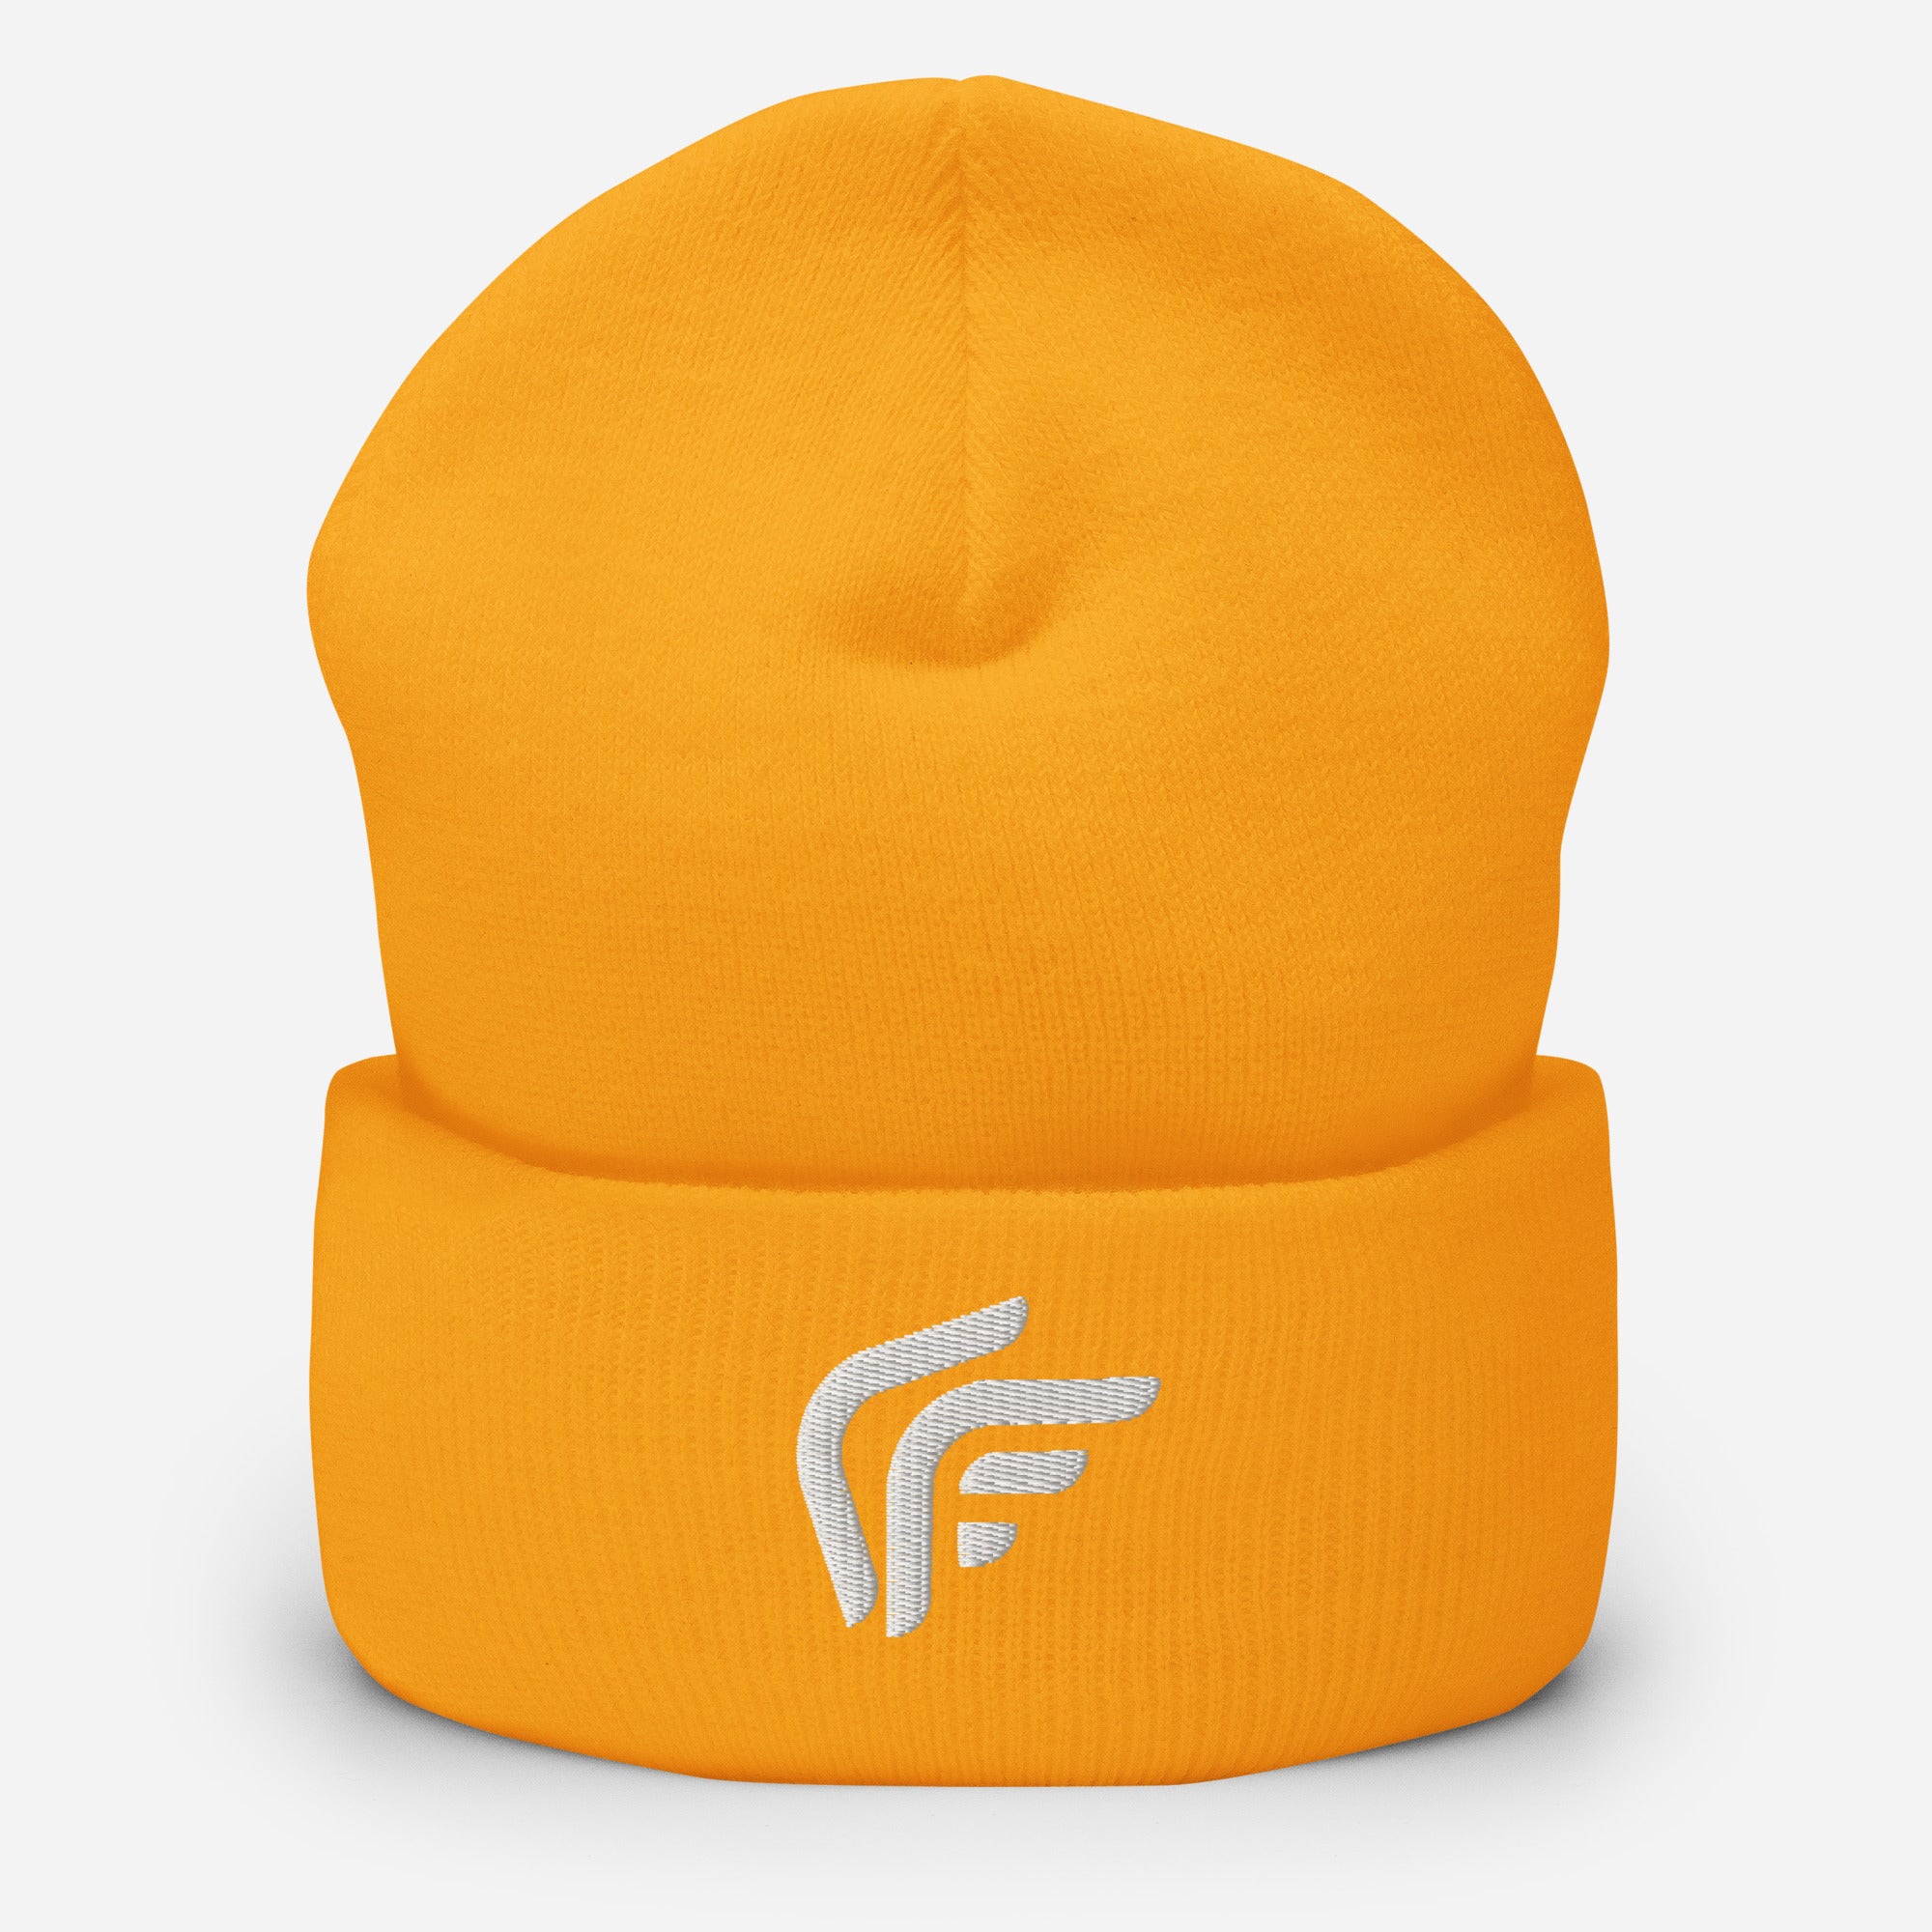 Favored By God Logo Beanie